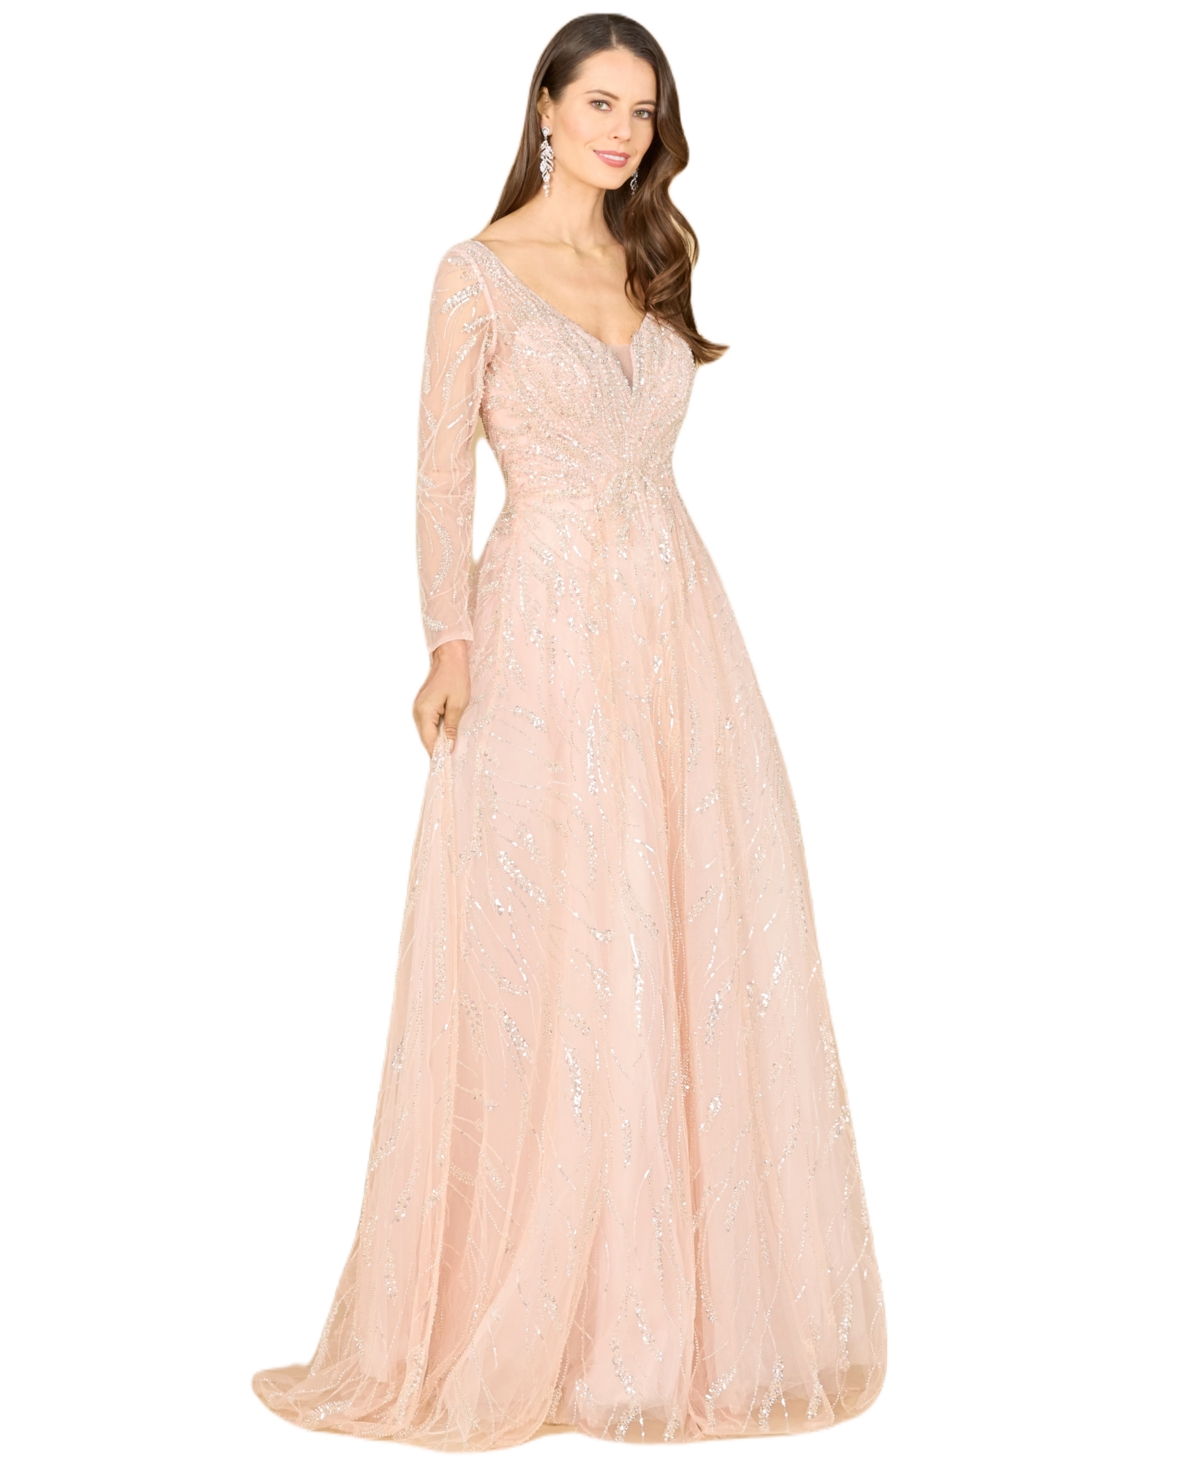 1950s History of Prom, Party, Evening and Formal Dresses Lara Womens Long Sleeve Beaded Lace Gown - Powder pink $698.00 AT vintagedancer.com